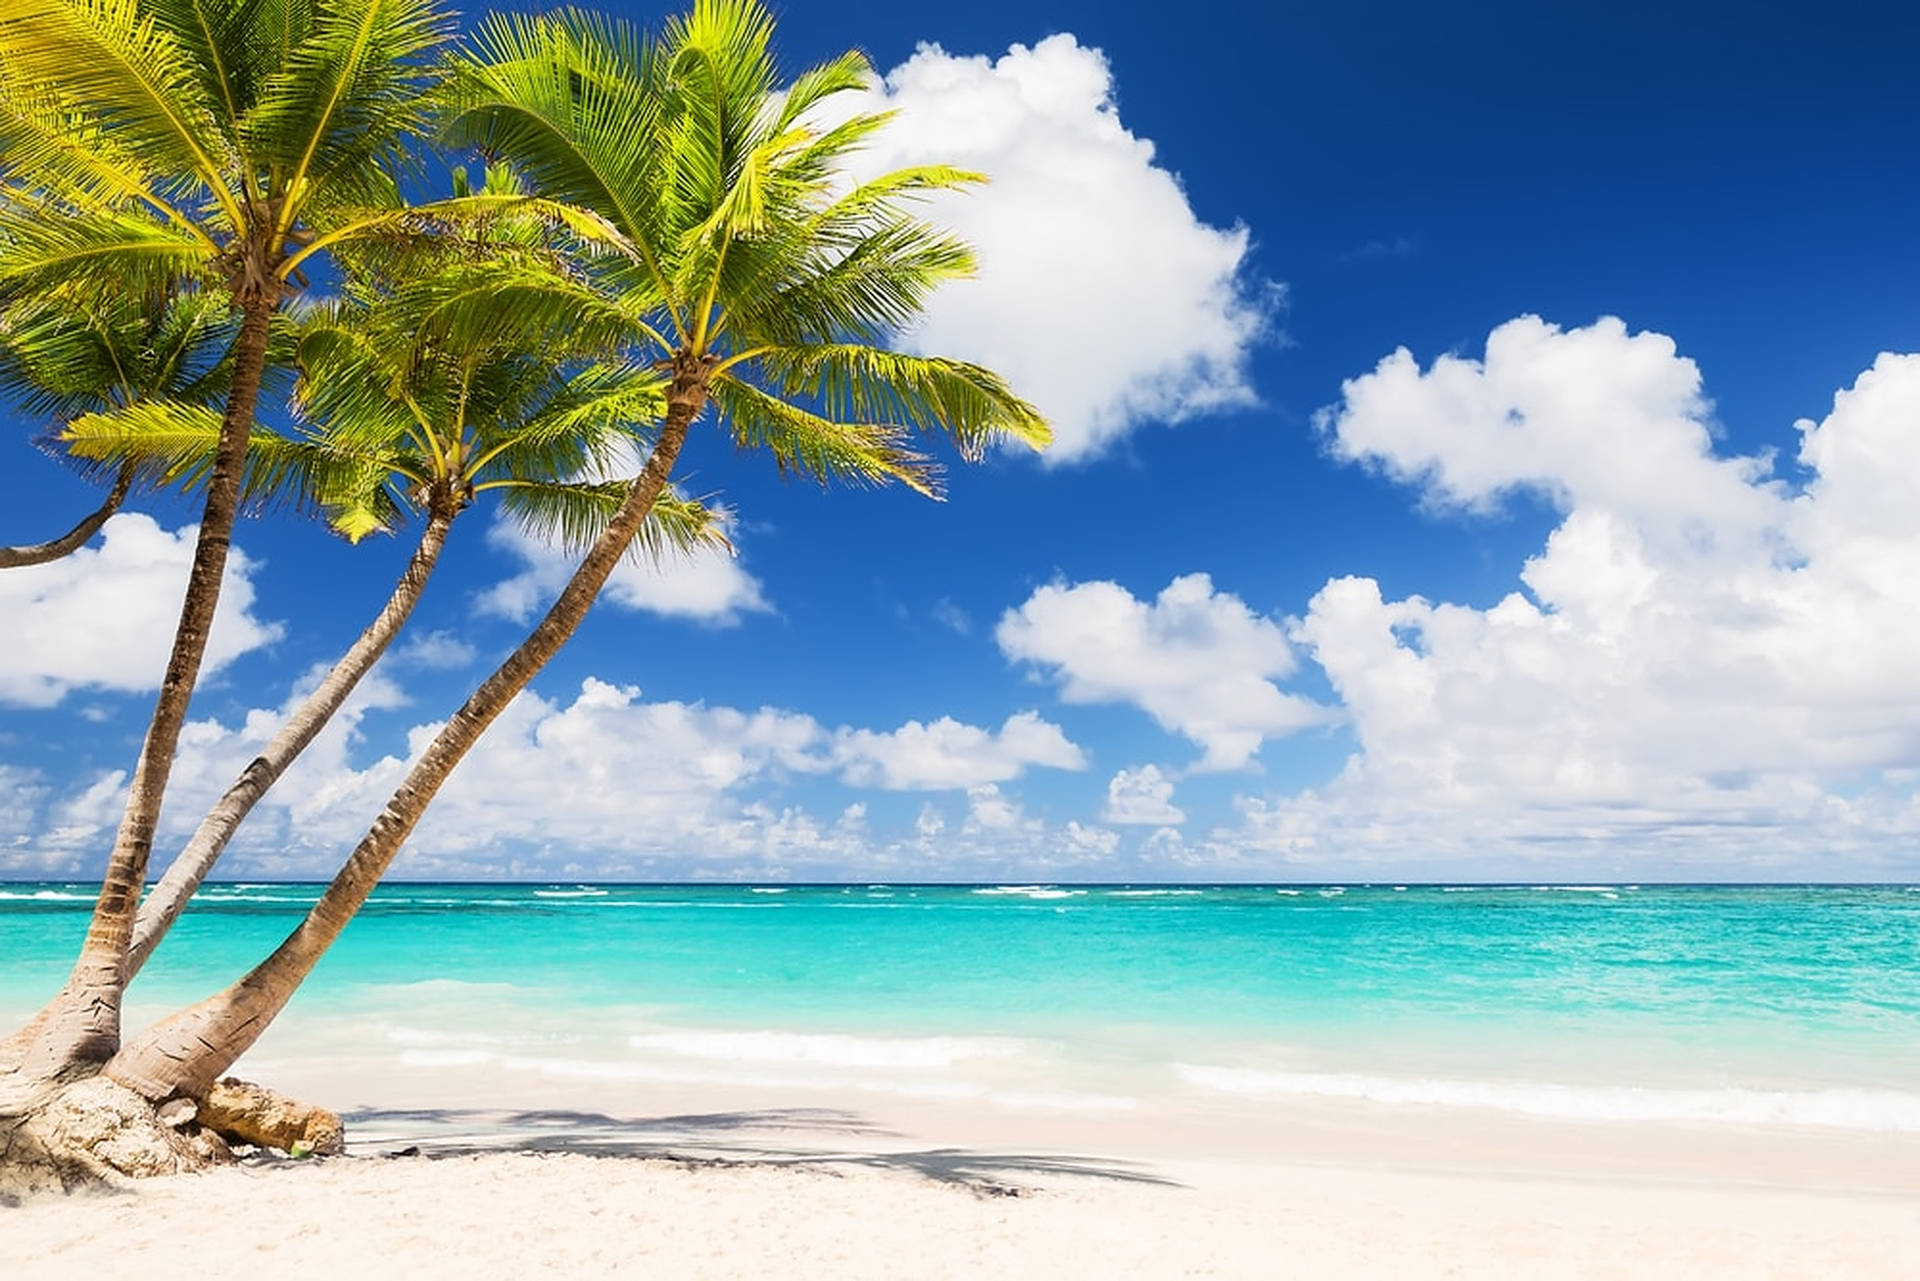 Azure Bliss: Sun, Sand, and Sea Vacation Wallpaper